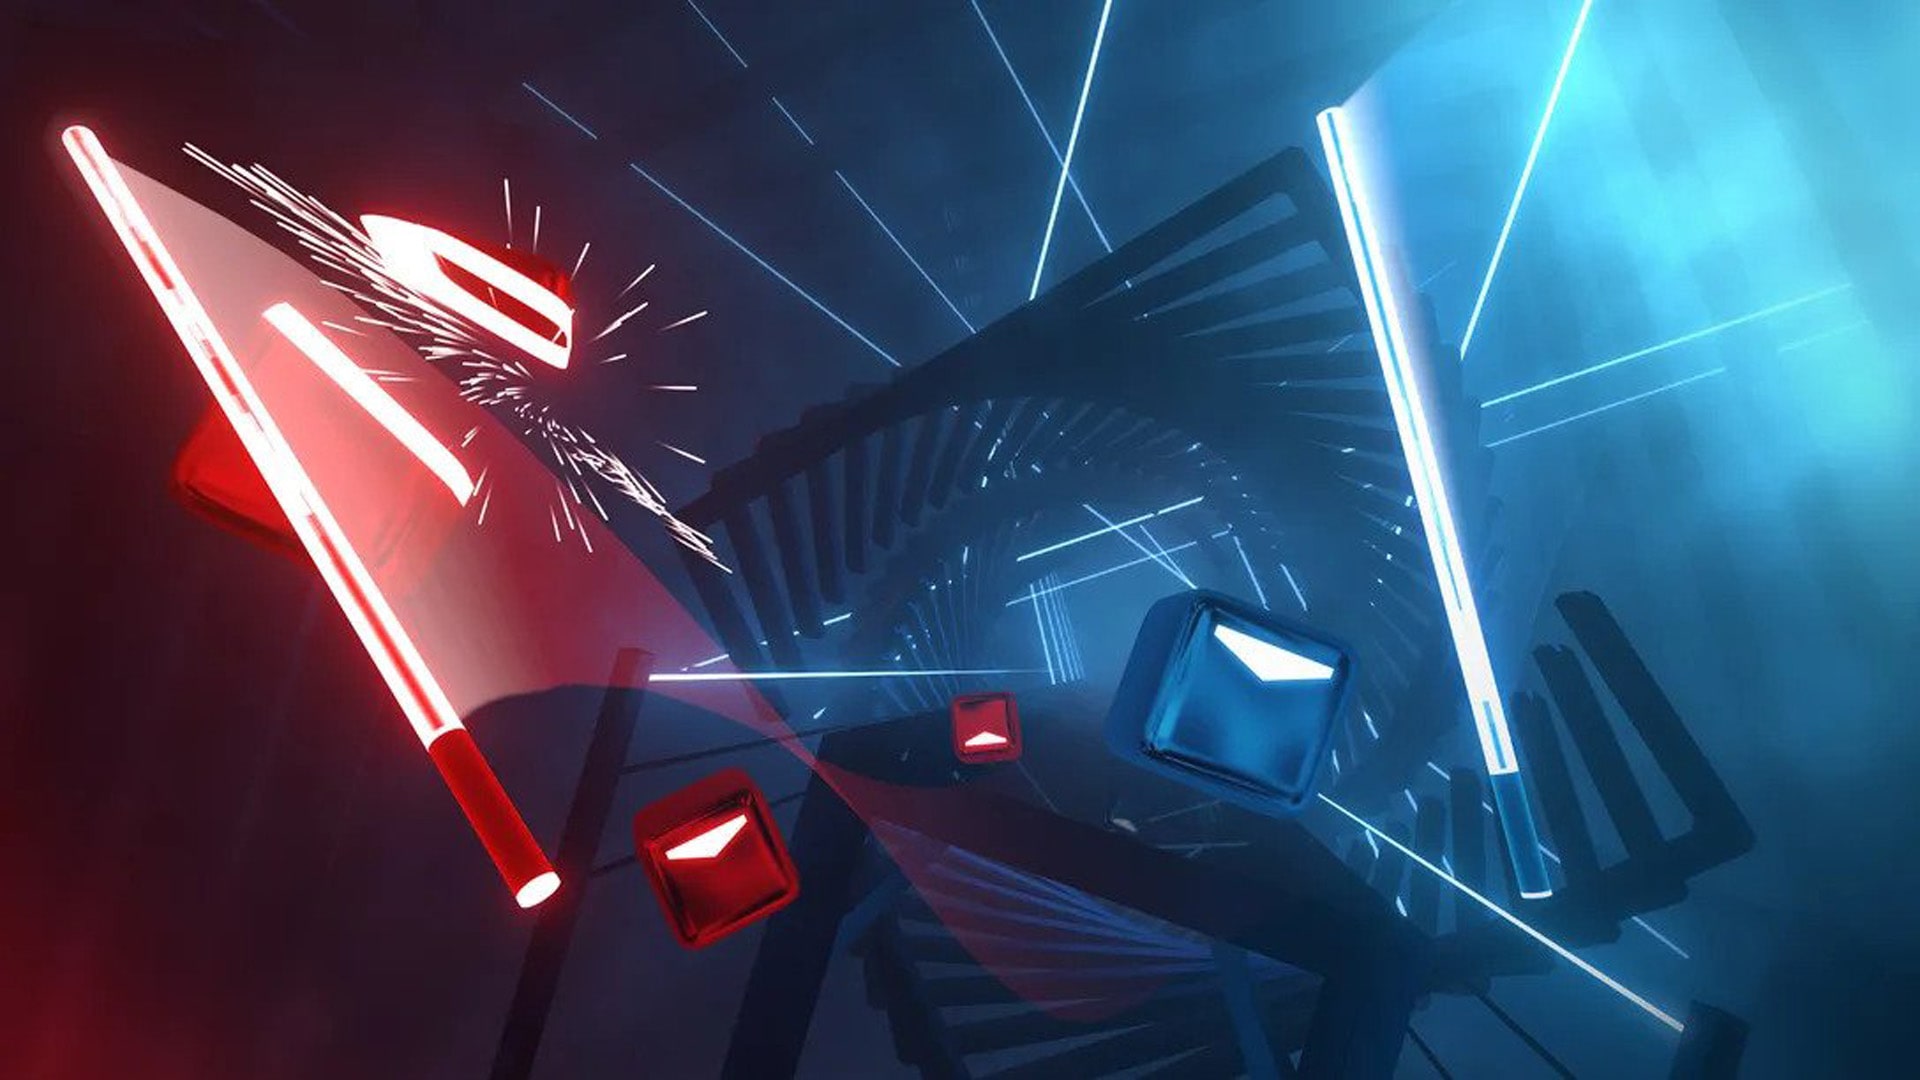 Screenshot from Beat Saber, a VR game on PS4